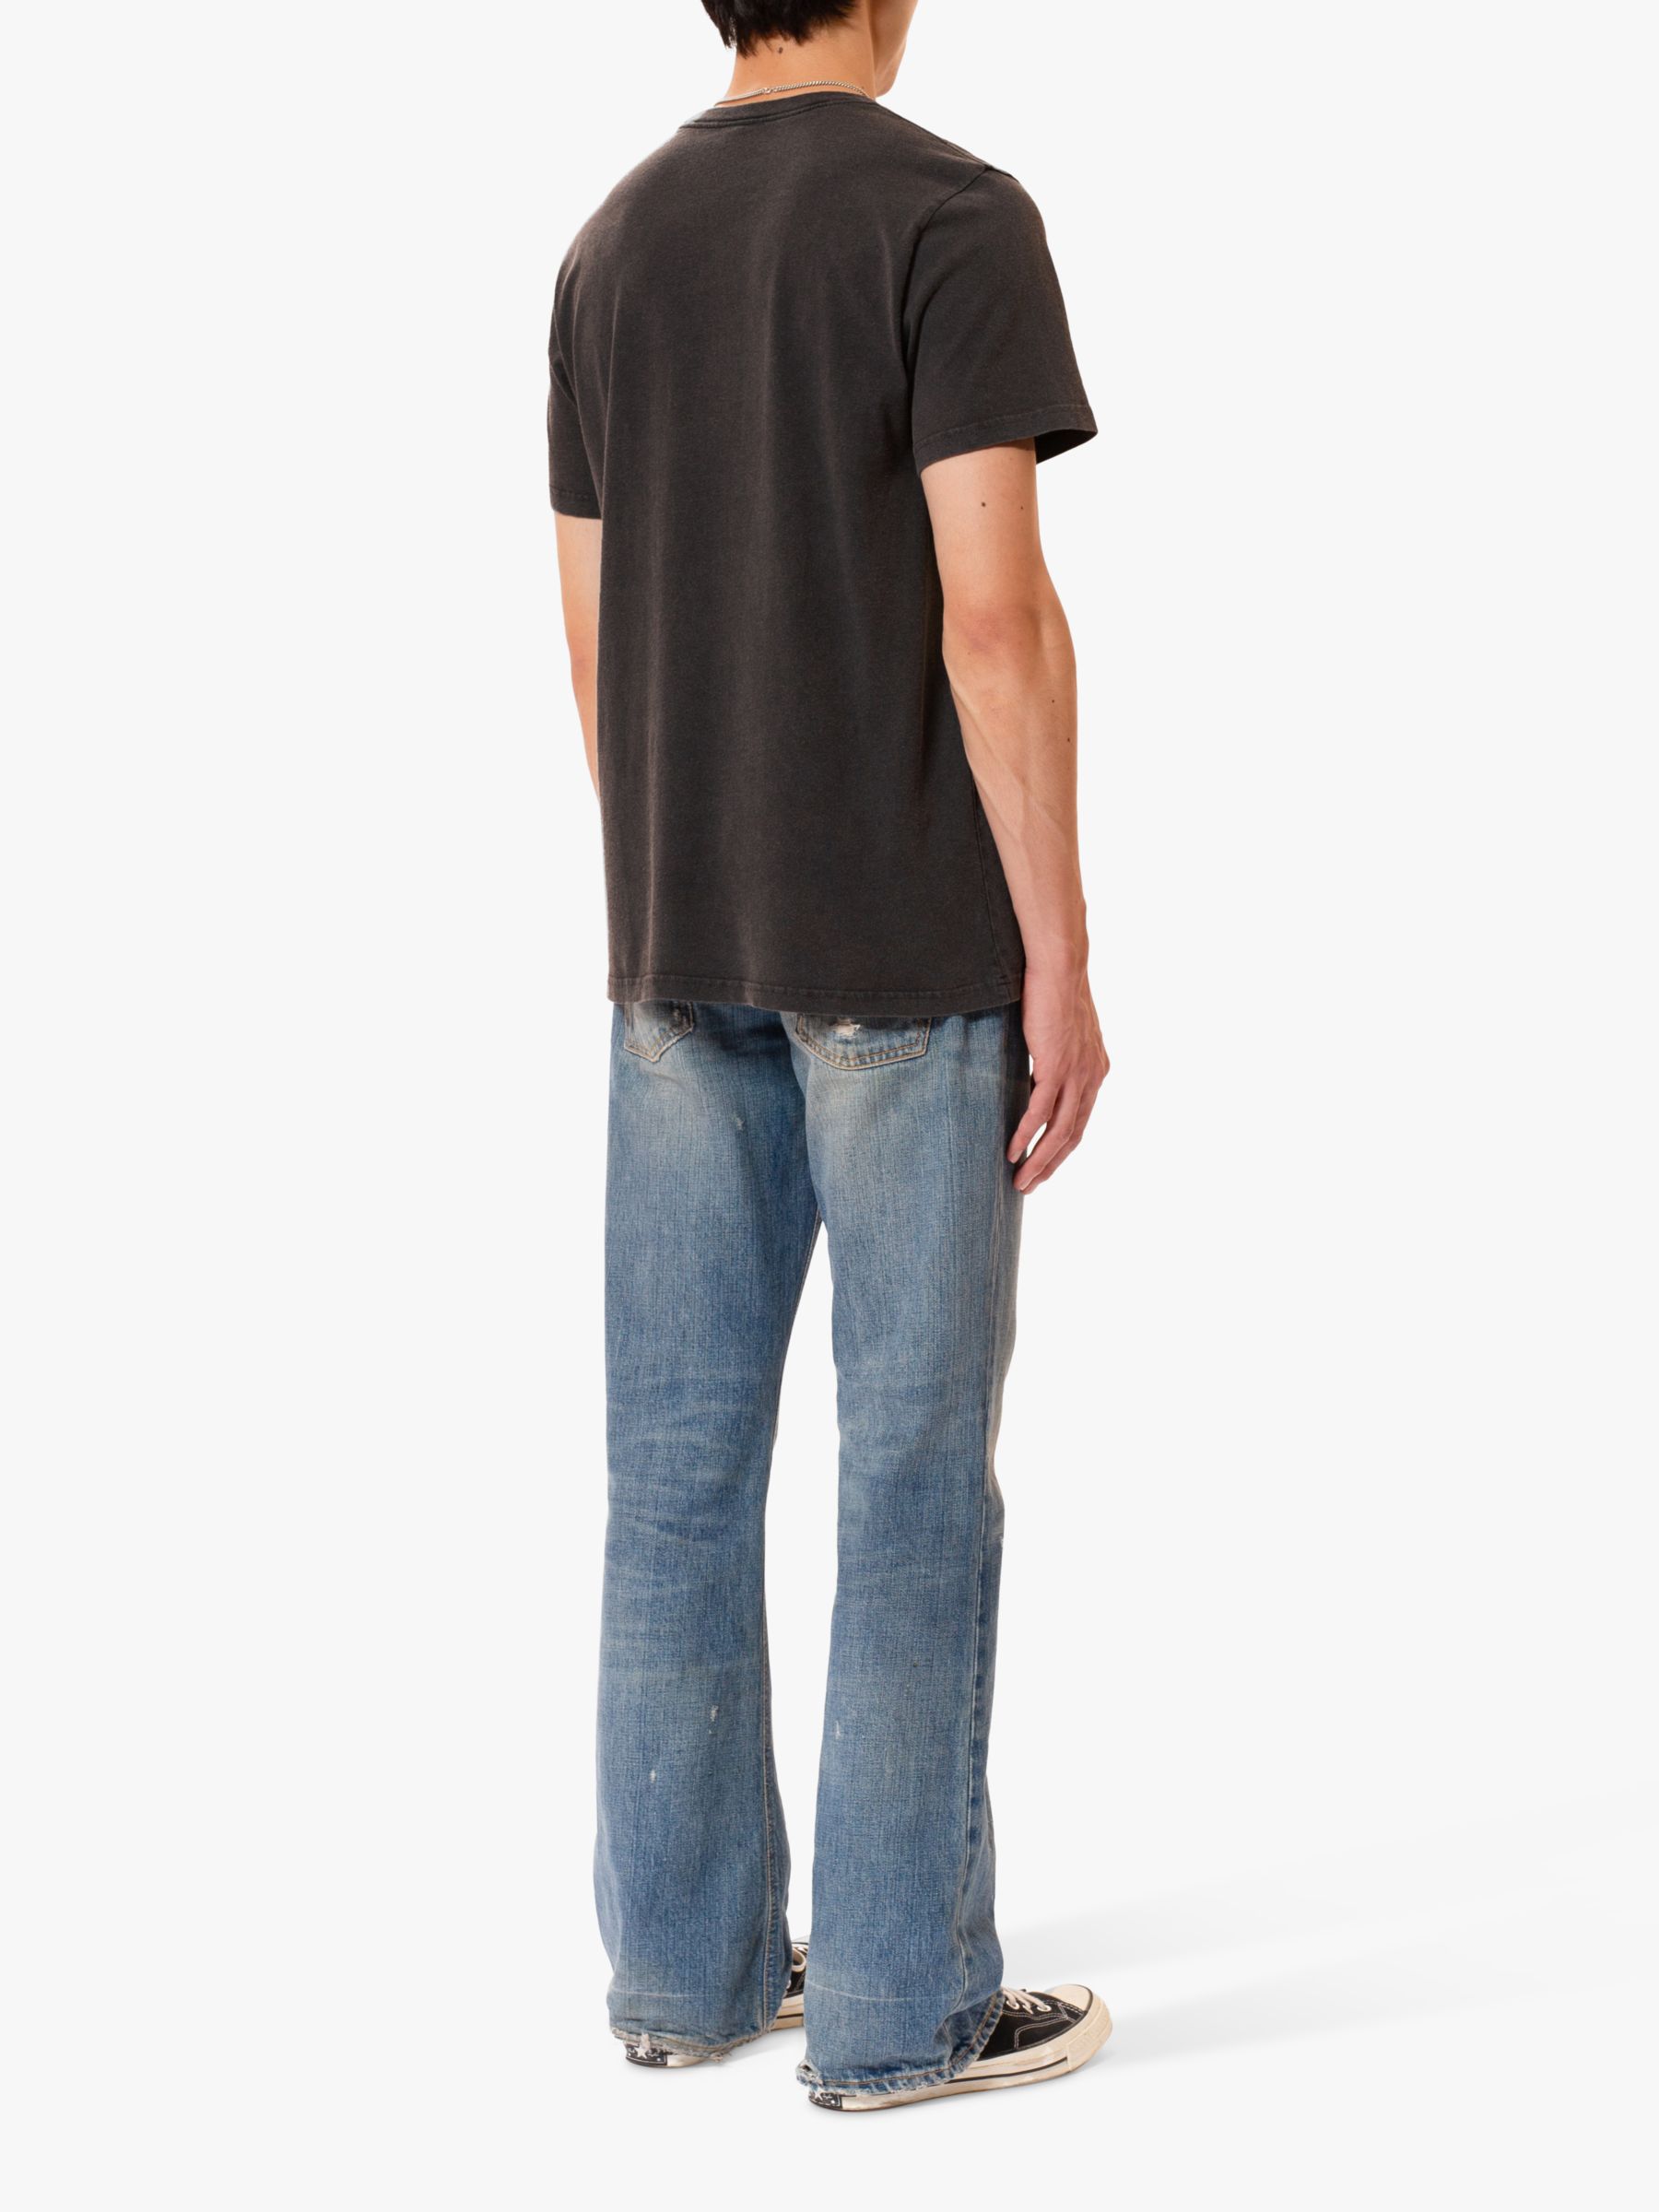 Nudie Jeans Roy Boogie T-Shirt, Antracite, S